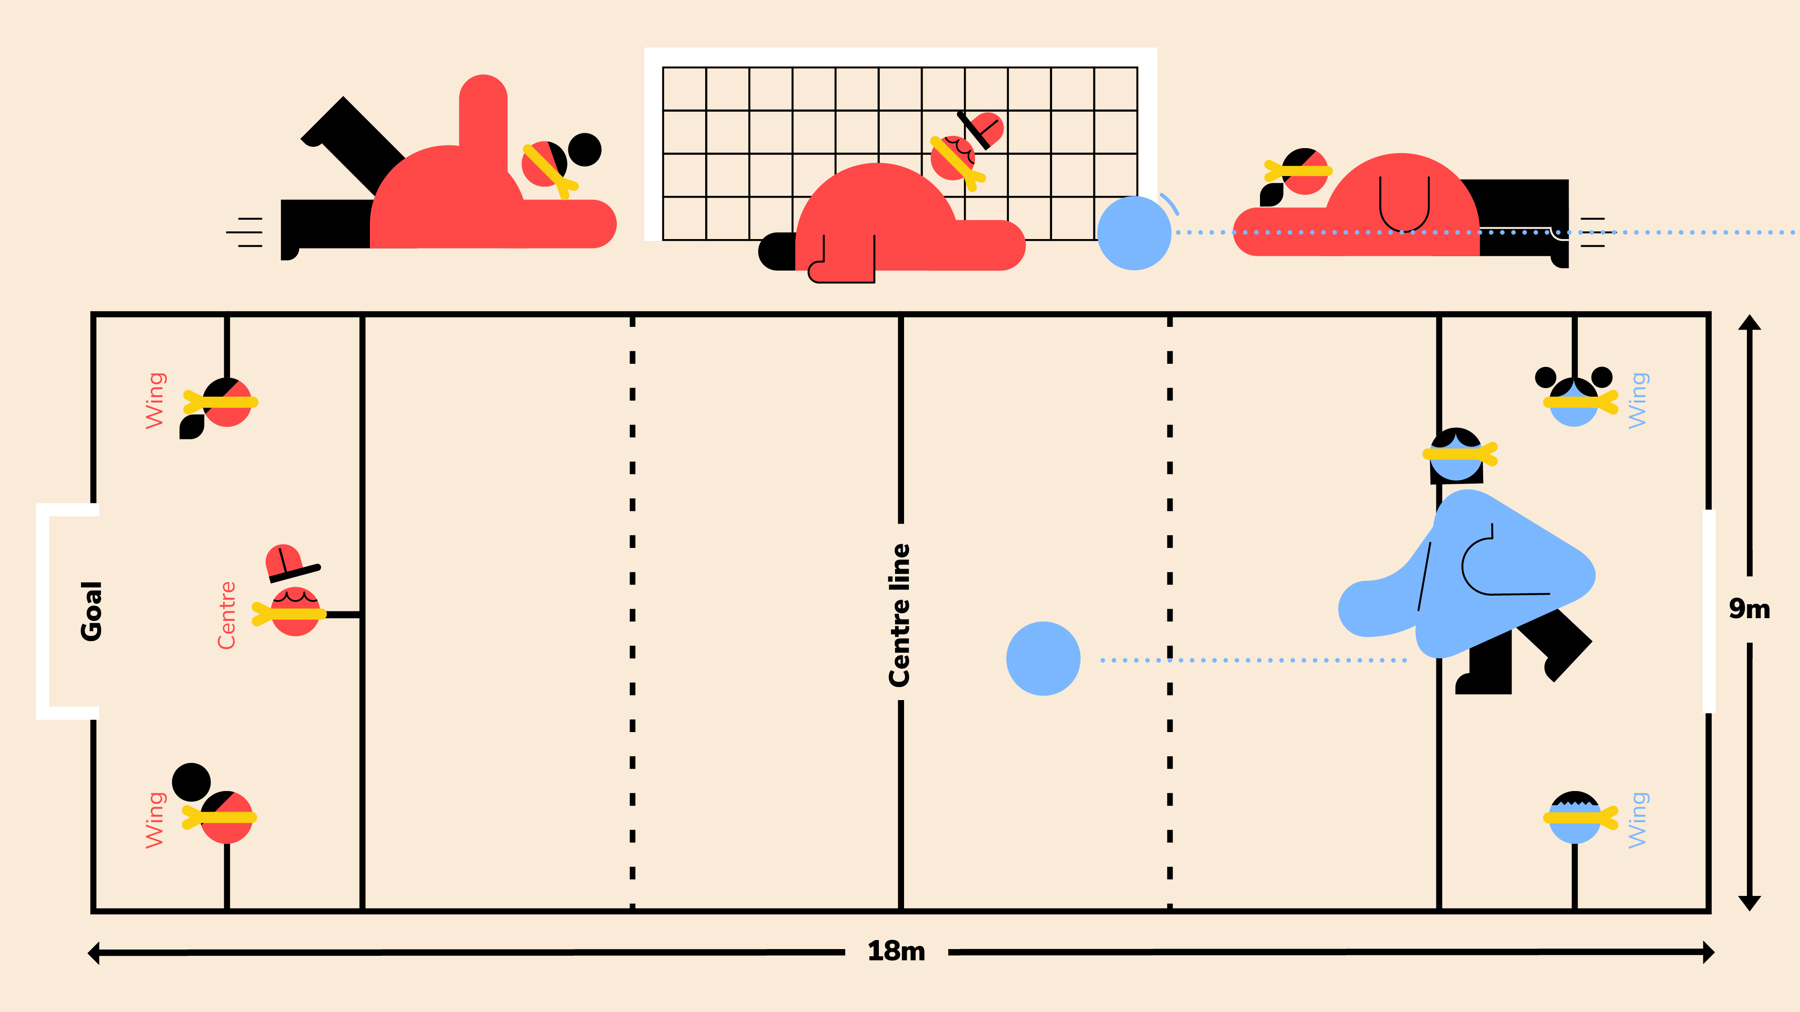 A court diagram for the game 'Goalball'.